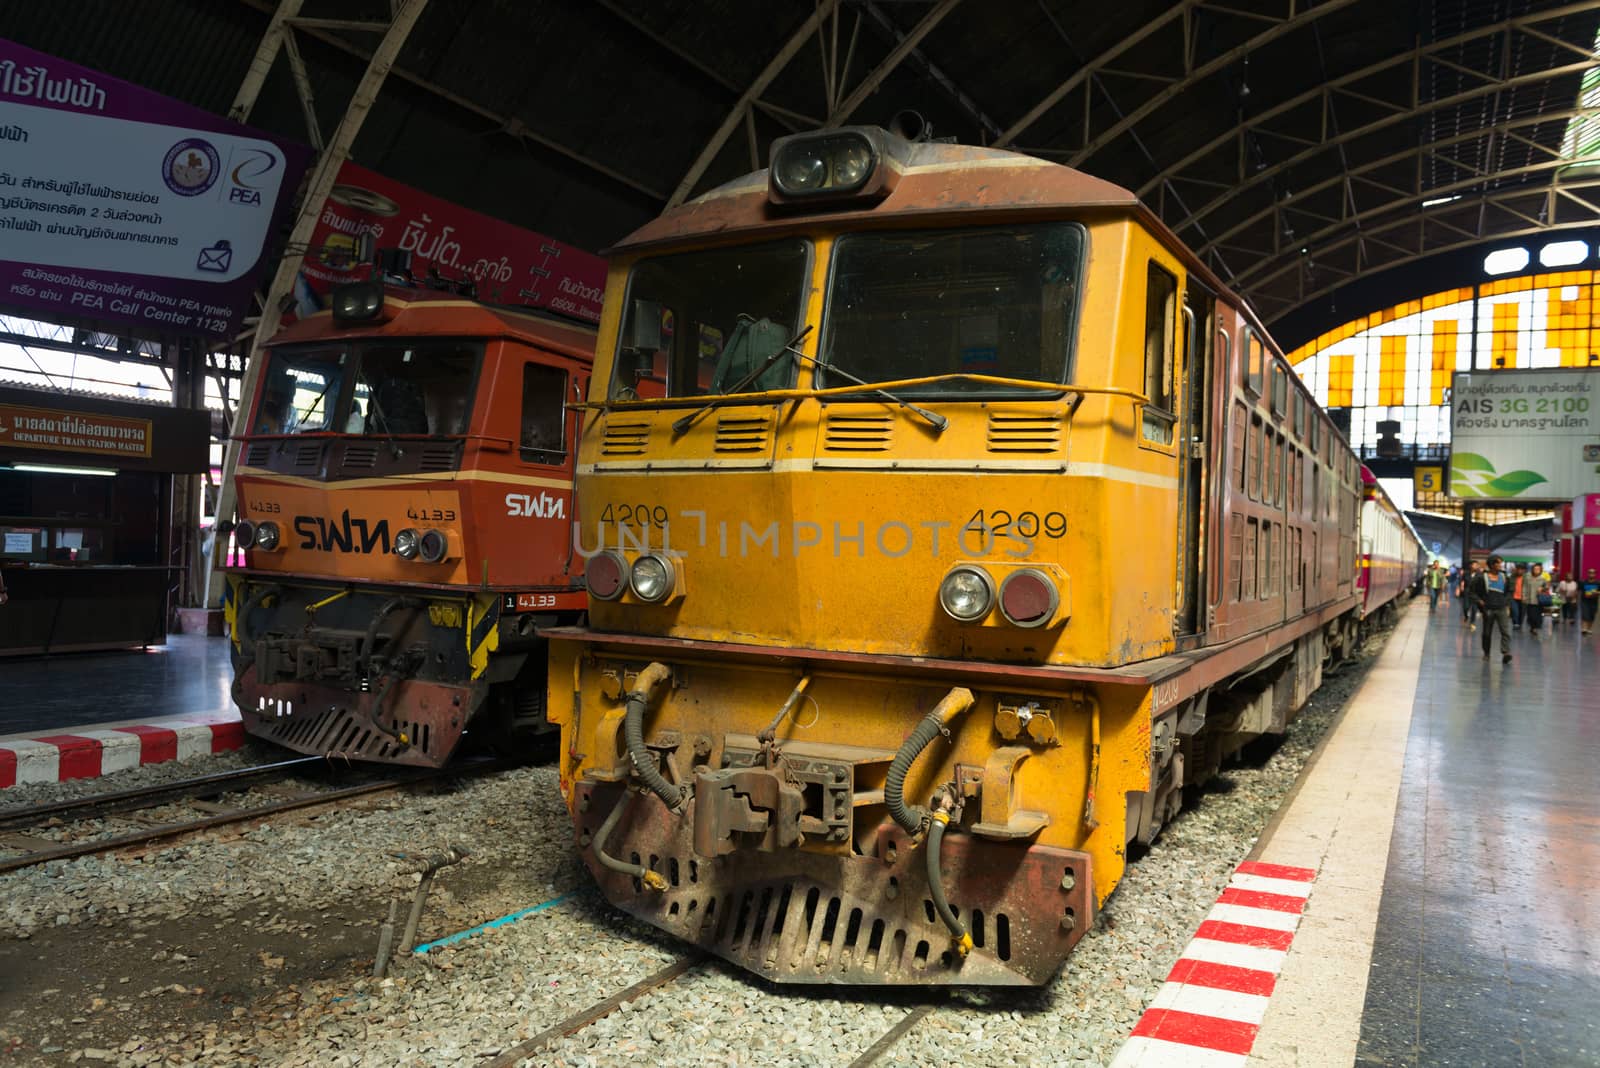 BANGKOK, THAILAND - 21 NOV 2013: Yellow locomotive and trains stand at central Krungthep Hua Lamphong railway station with people on platforms